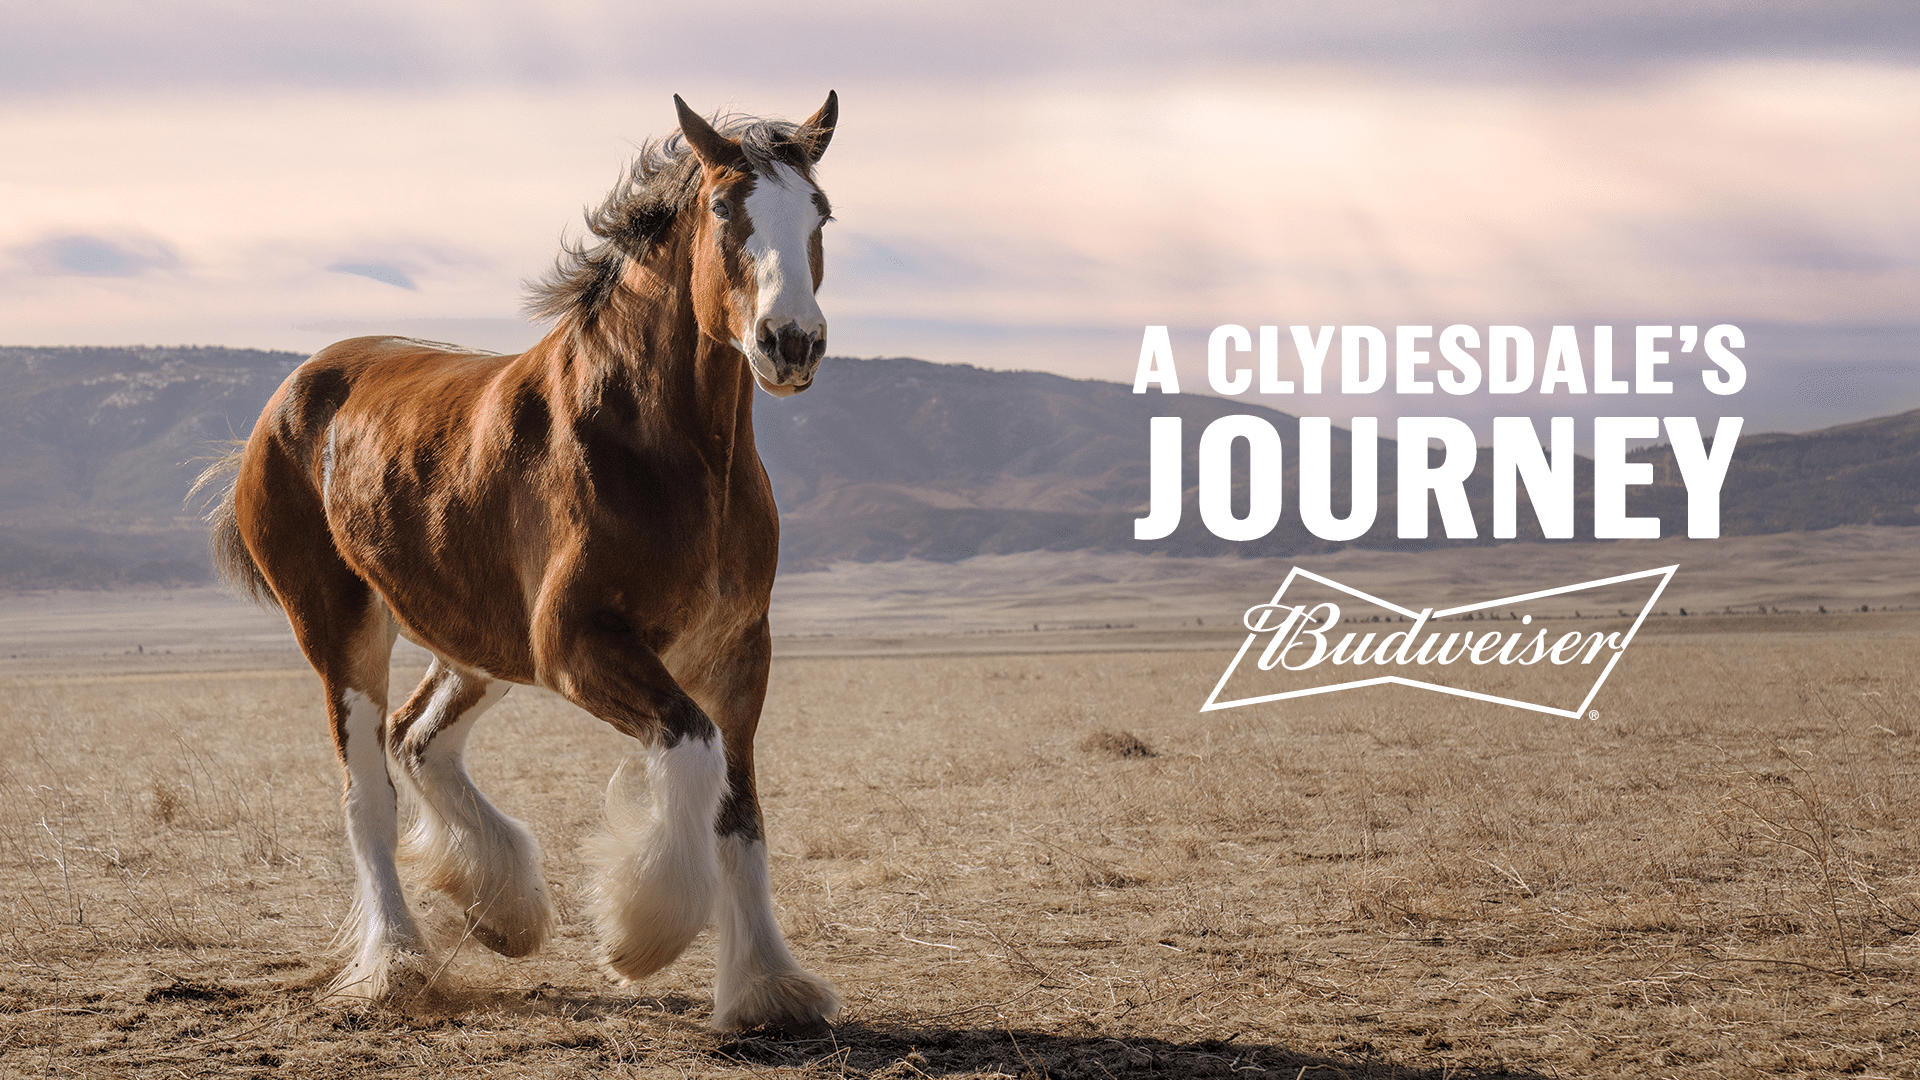 Budweiser Makes Powerful Super Bowl Comeback with a Message of American Resilience